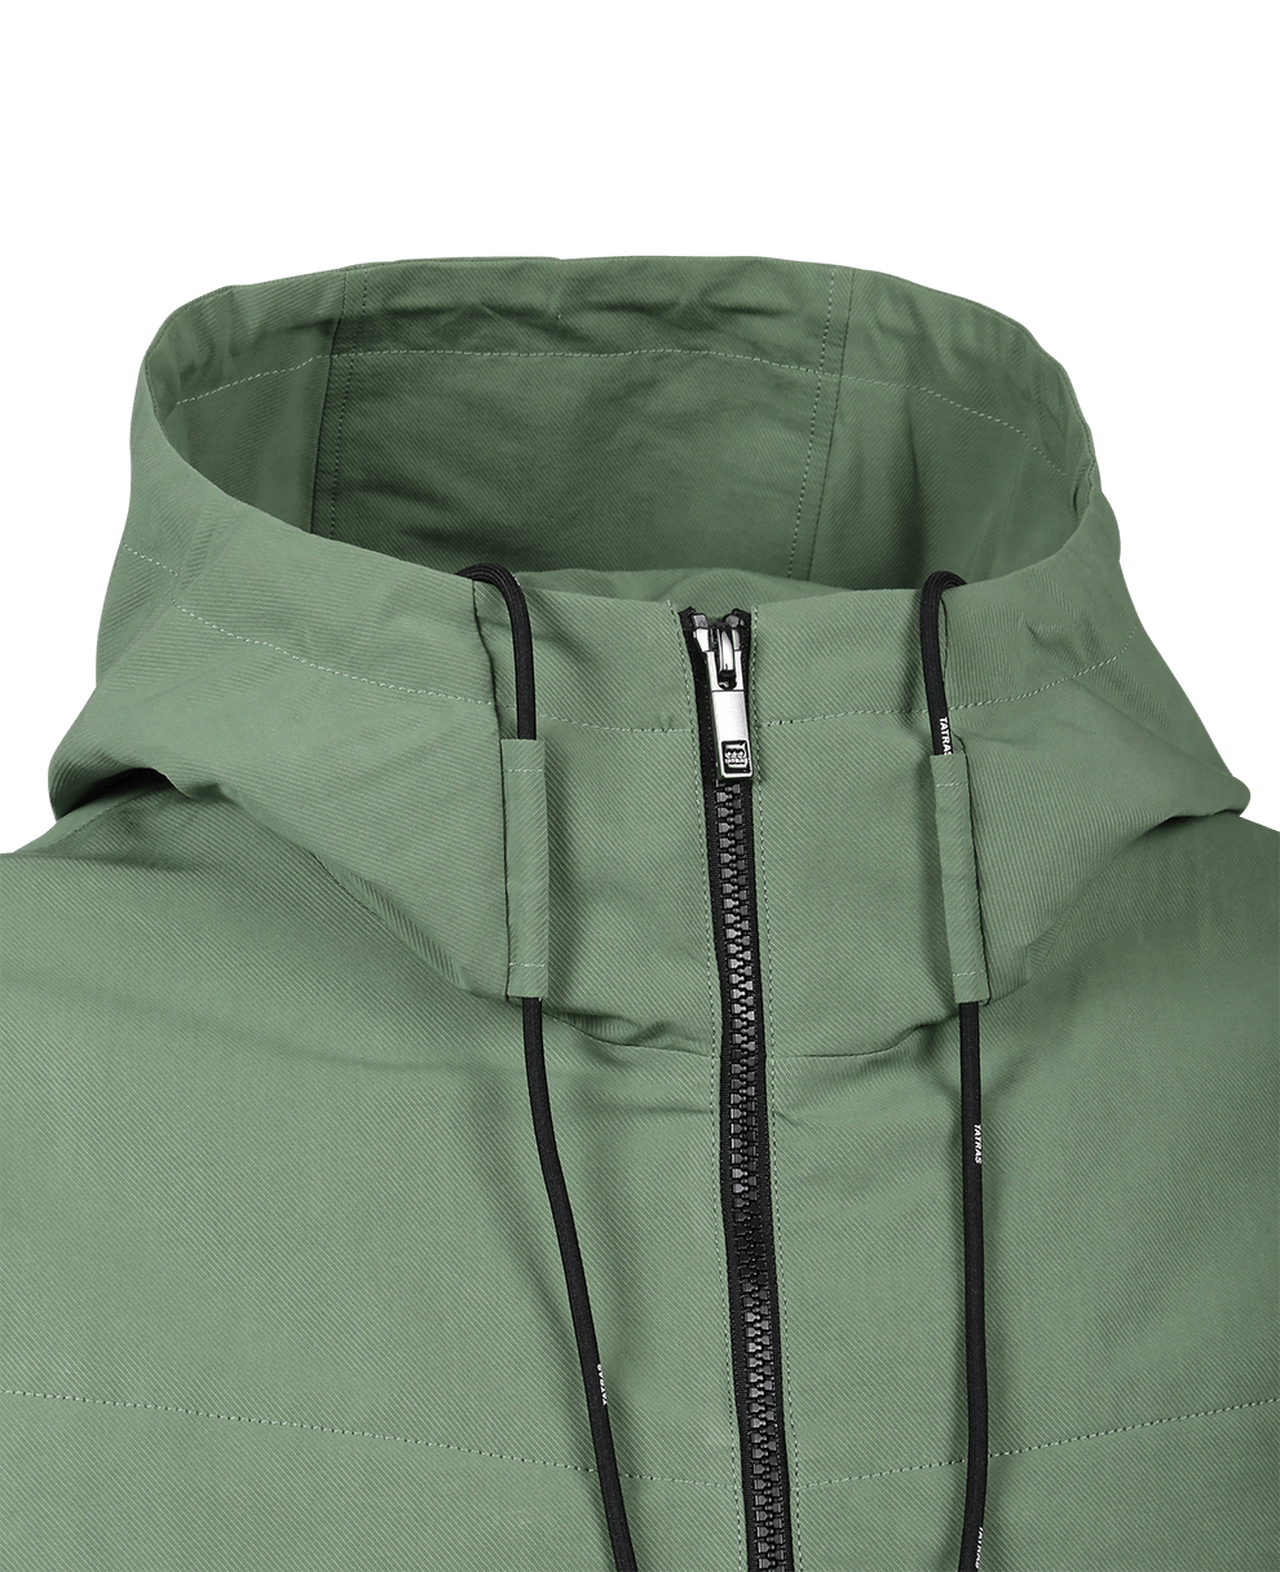 ALCYONE MEN'S BLOUSON,GREEN, large image number 3